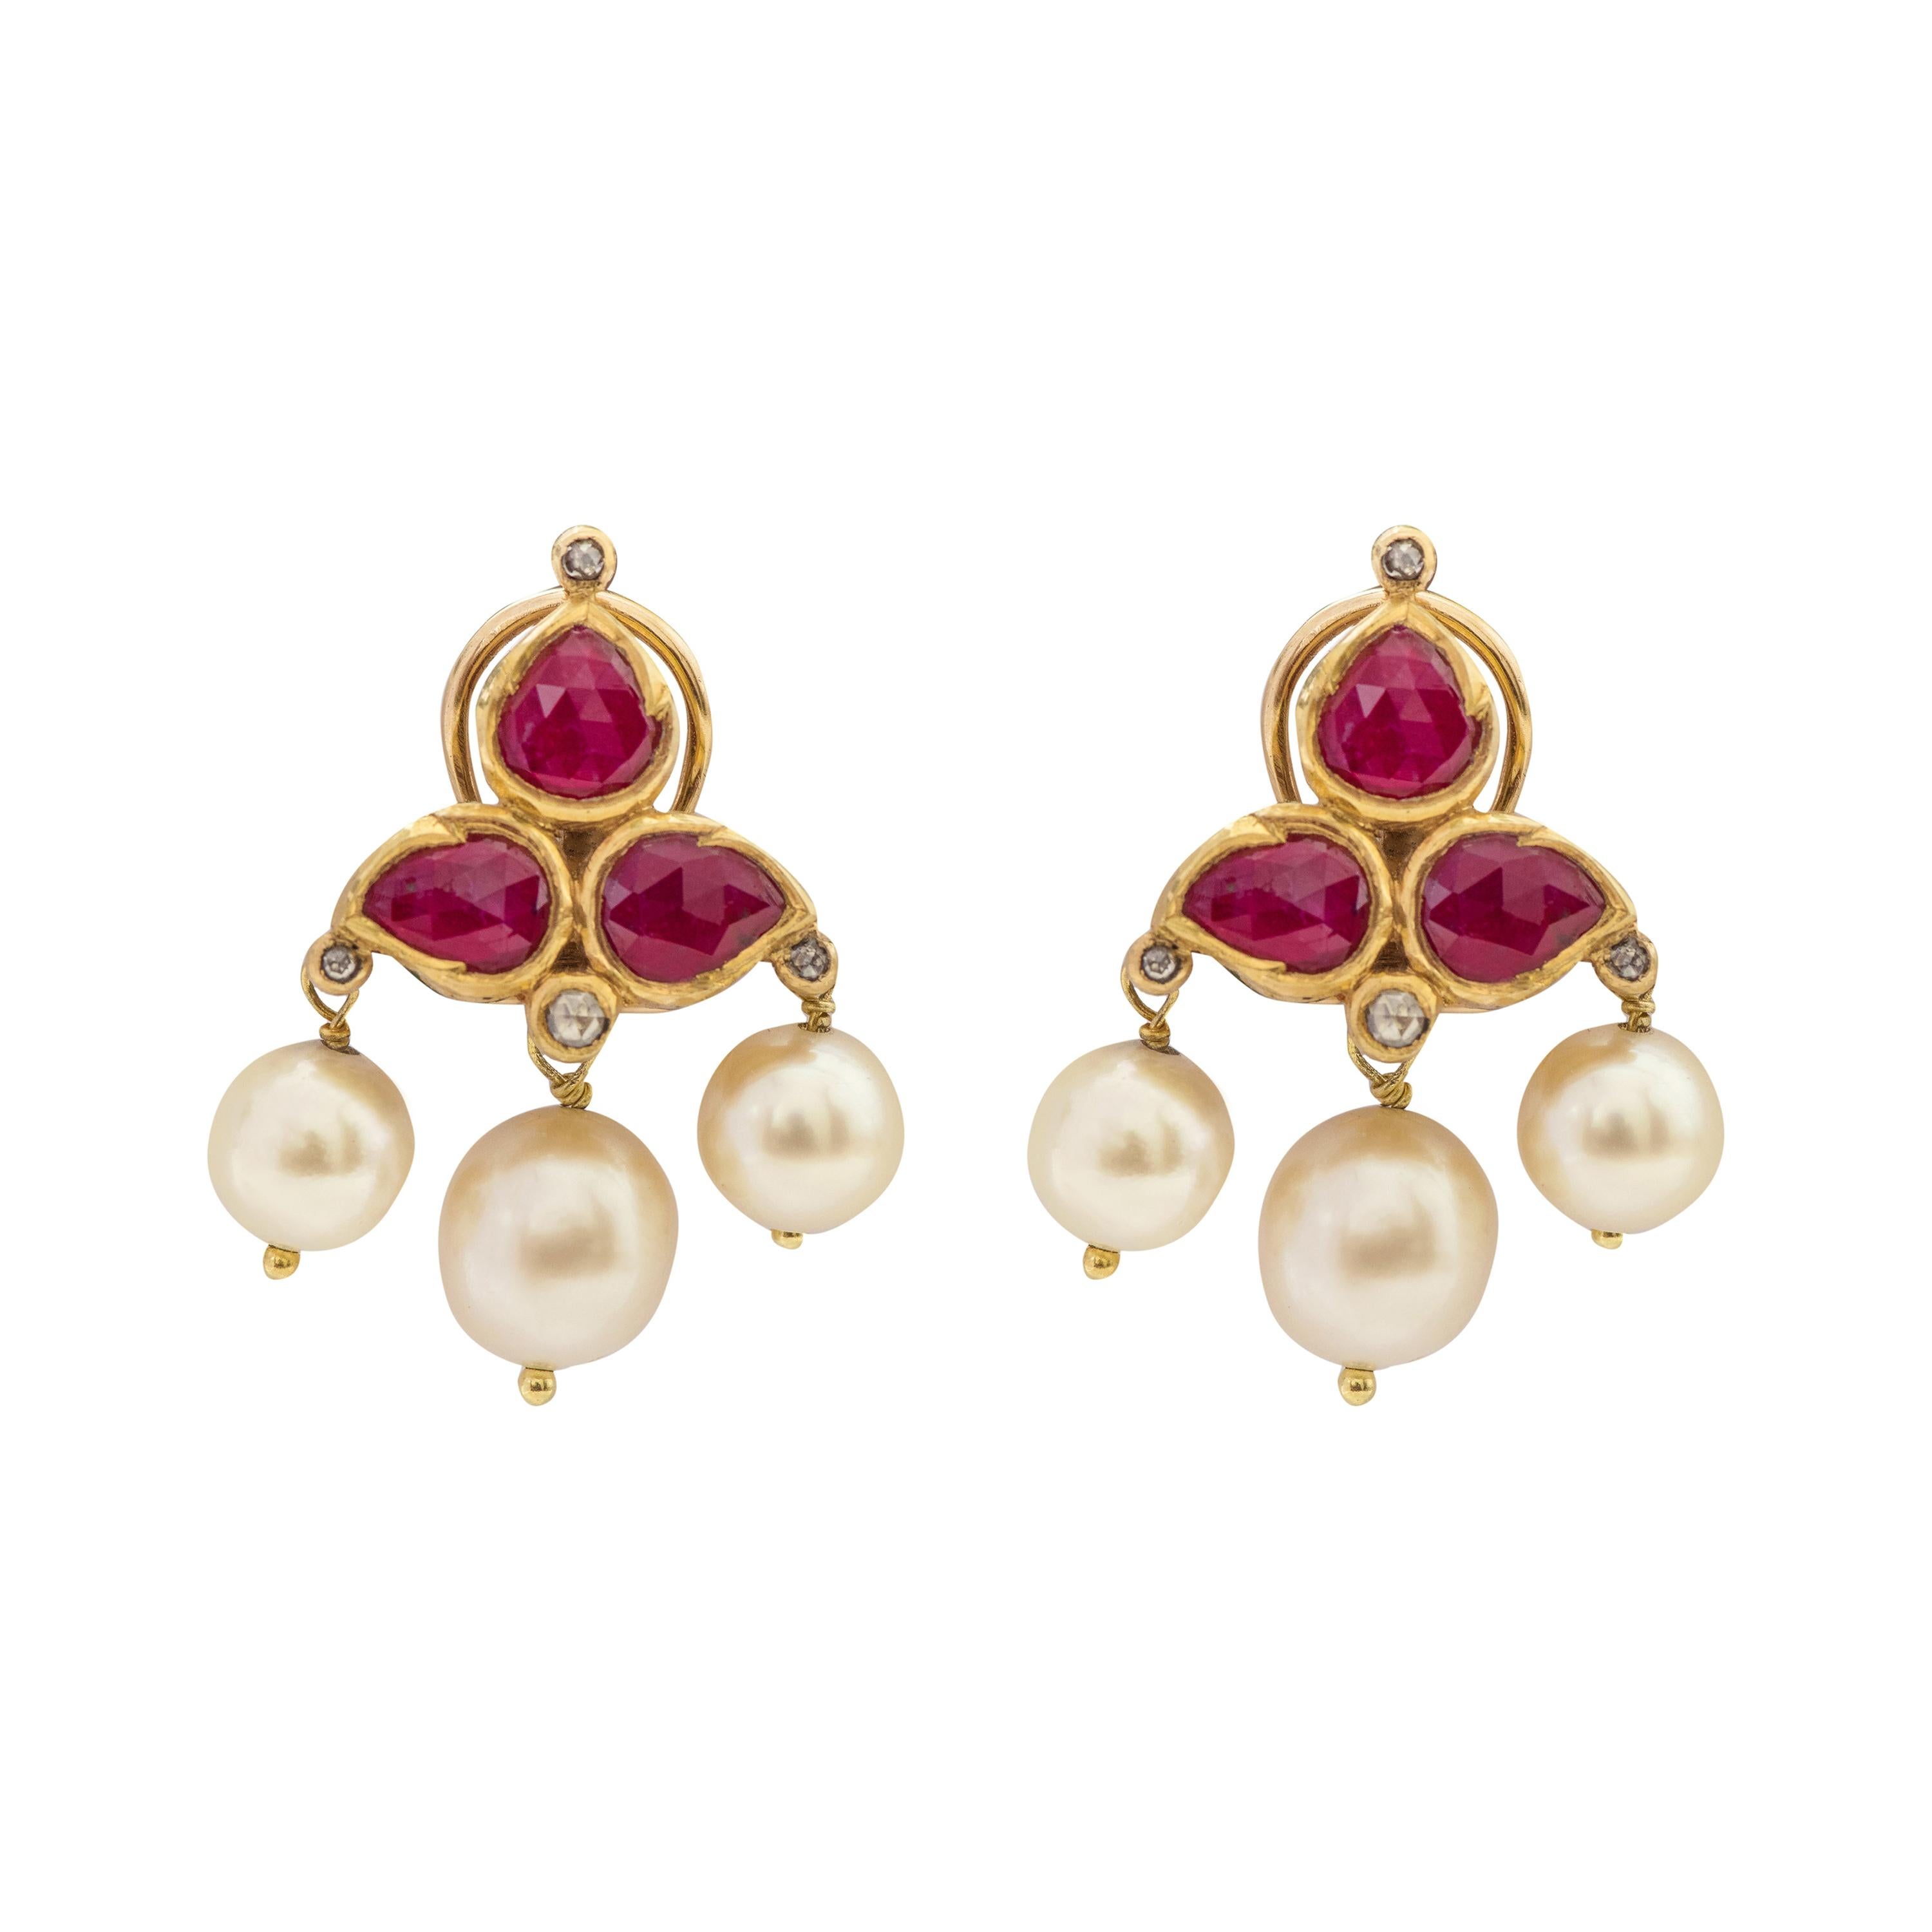 22 Karat Gold Ruby, Diamond, and Pearl Stud Earring Enamel Work Handcrafted For Sale